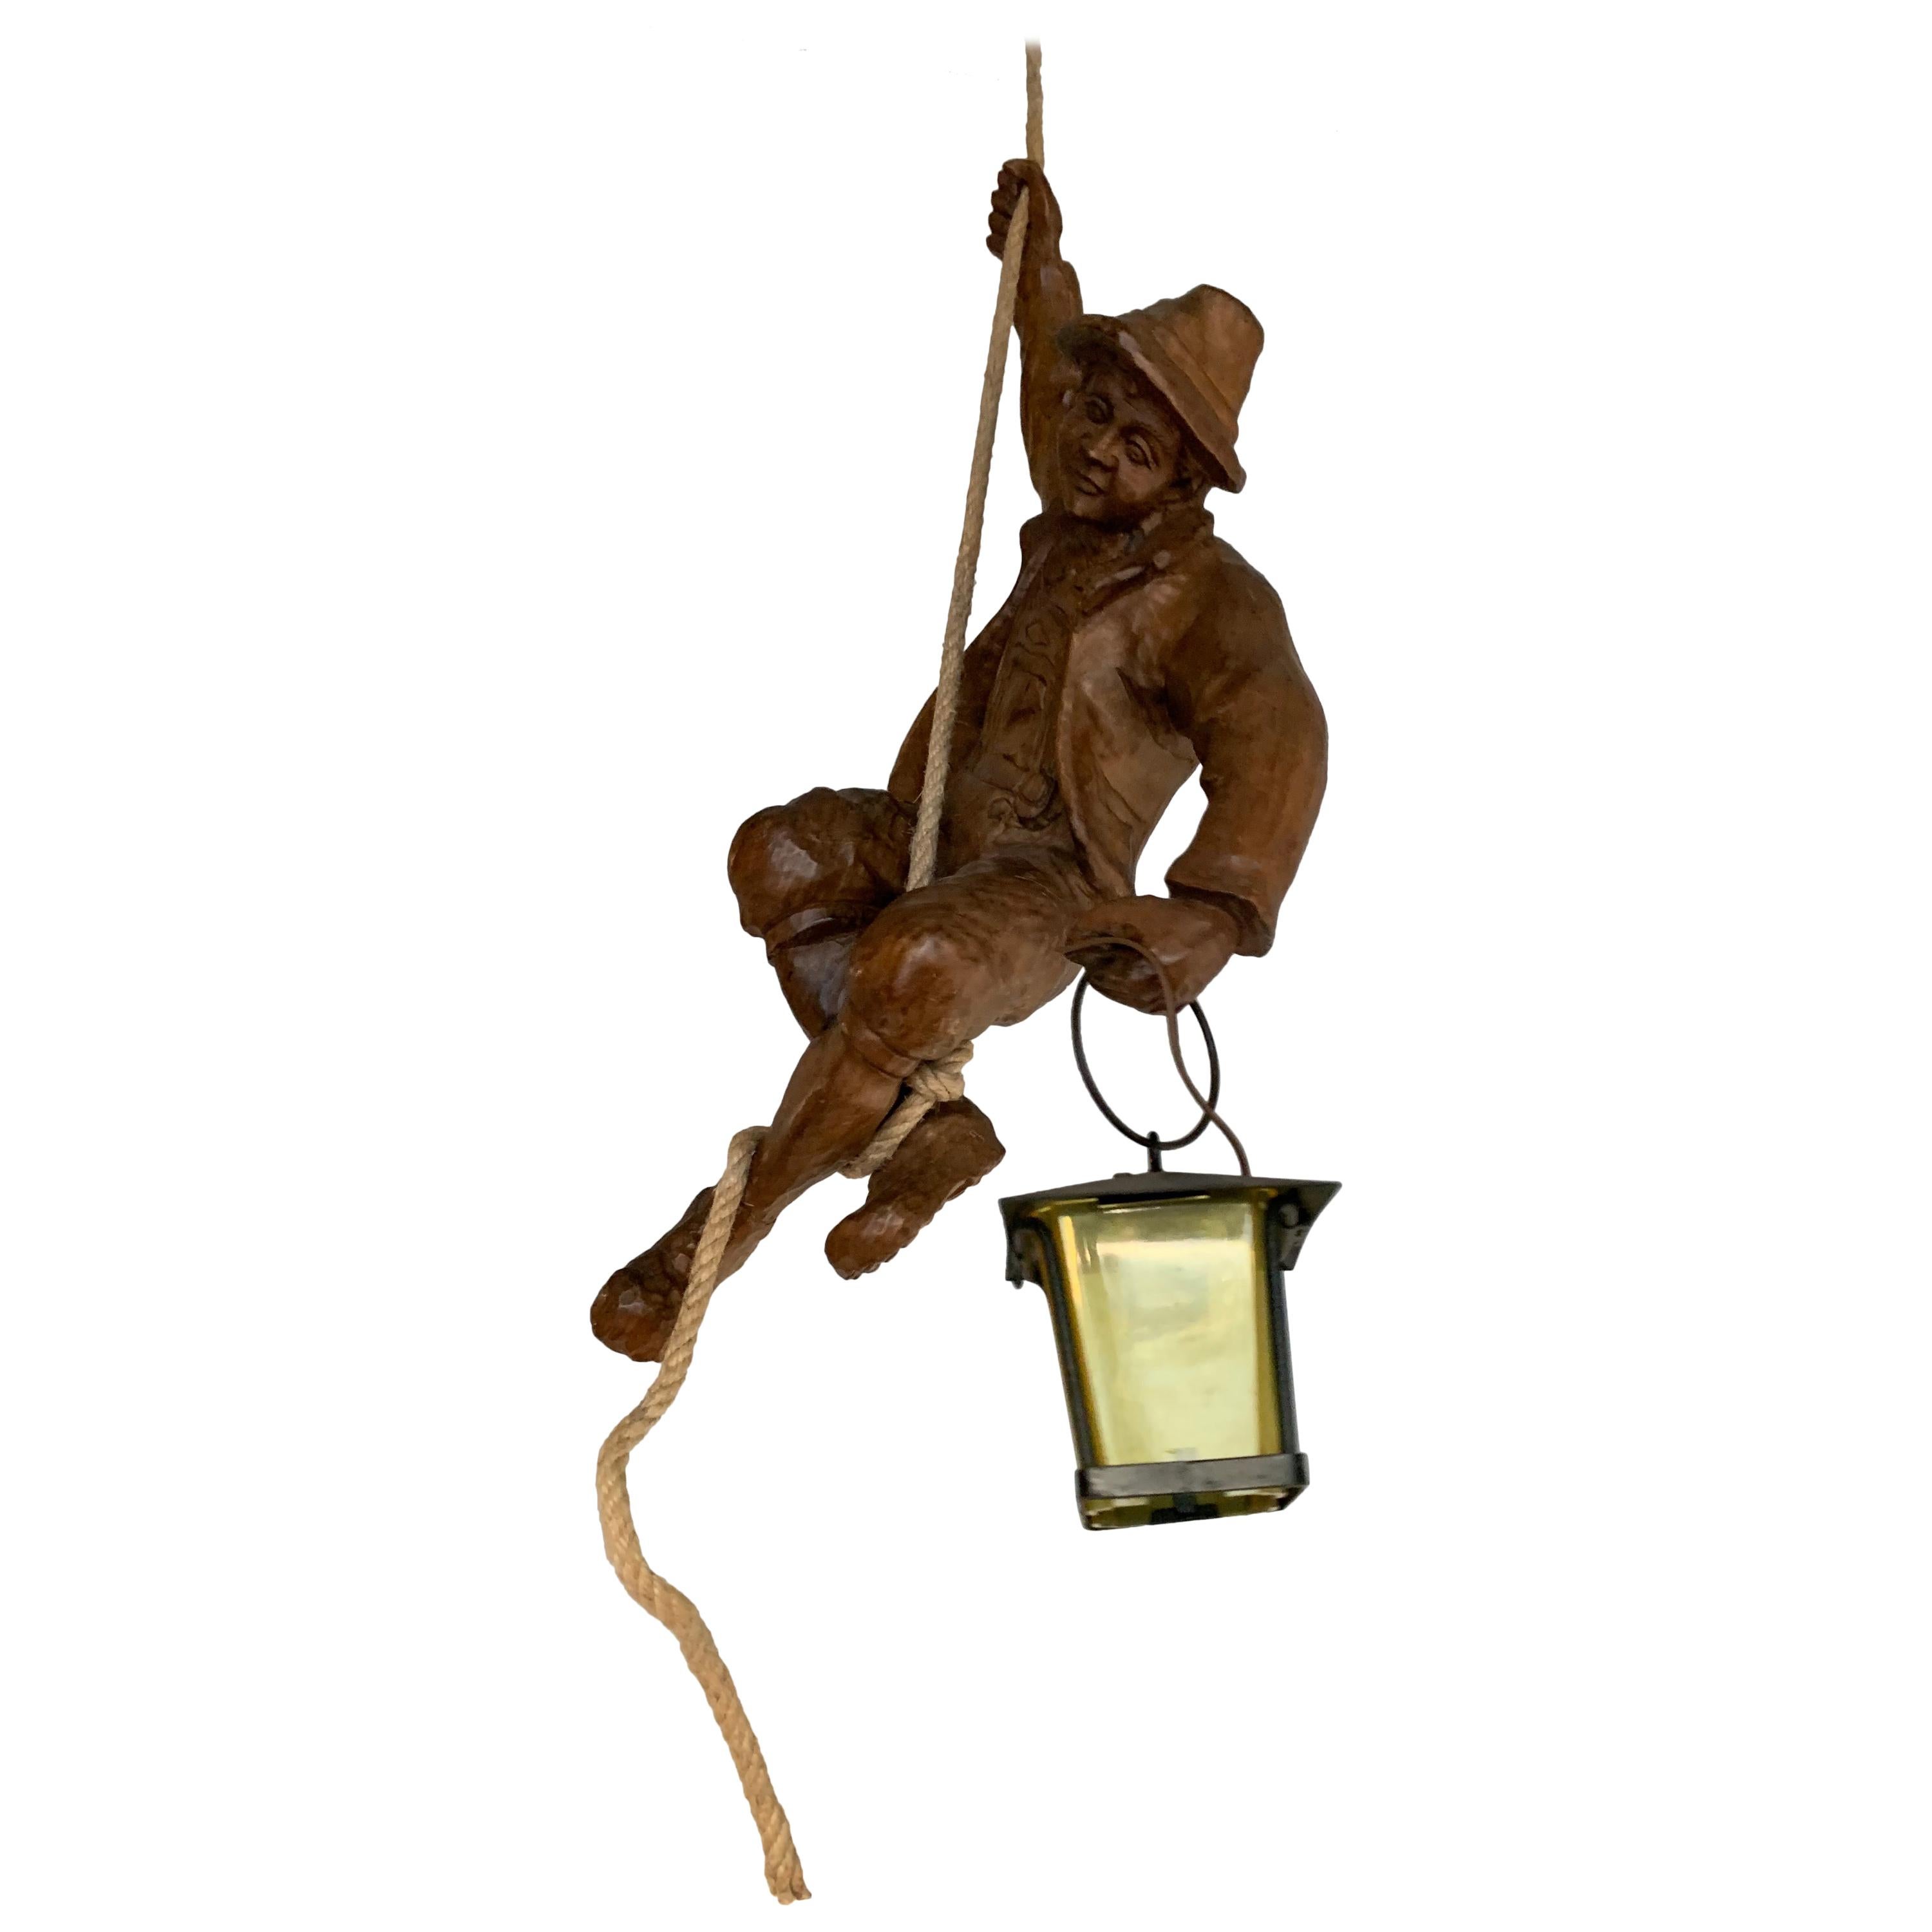 Vintage Hand Carved Wooden Mountaineer Sculpture Pendant Light with Lantern